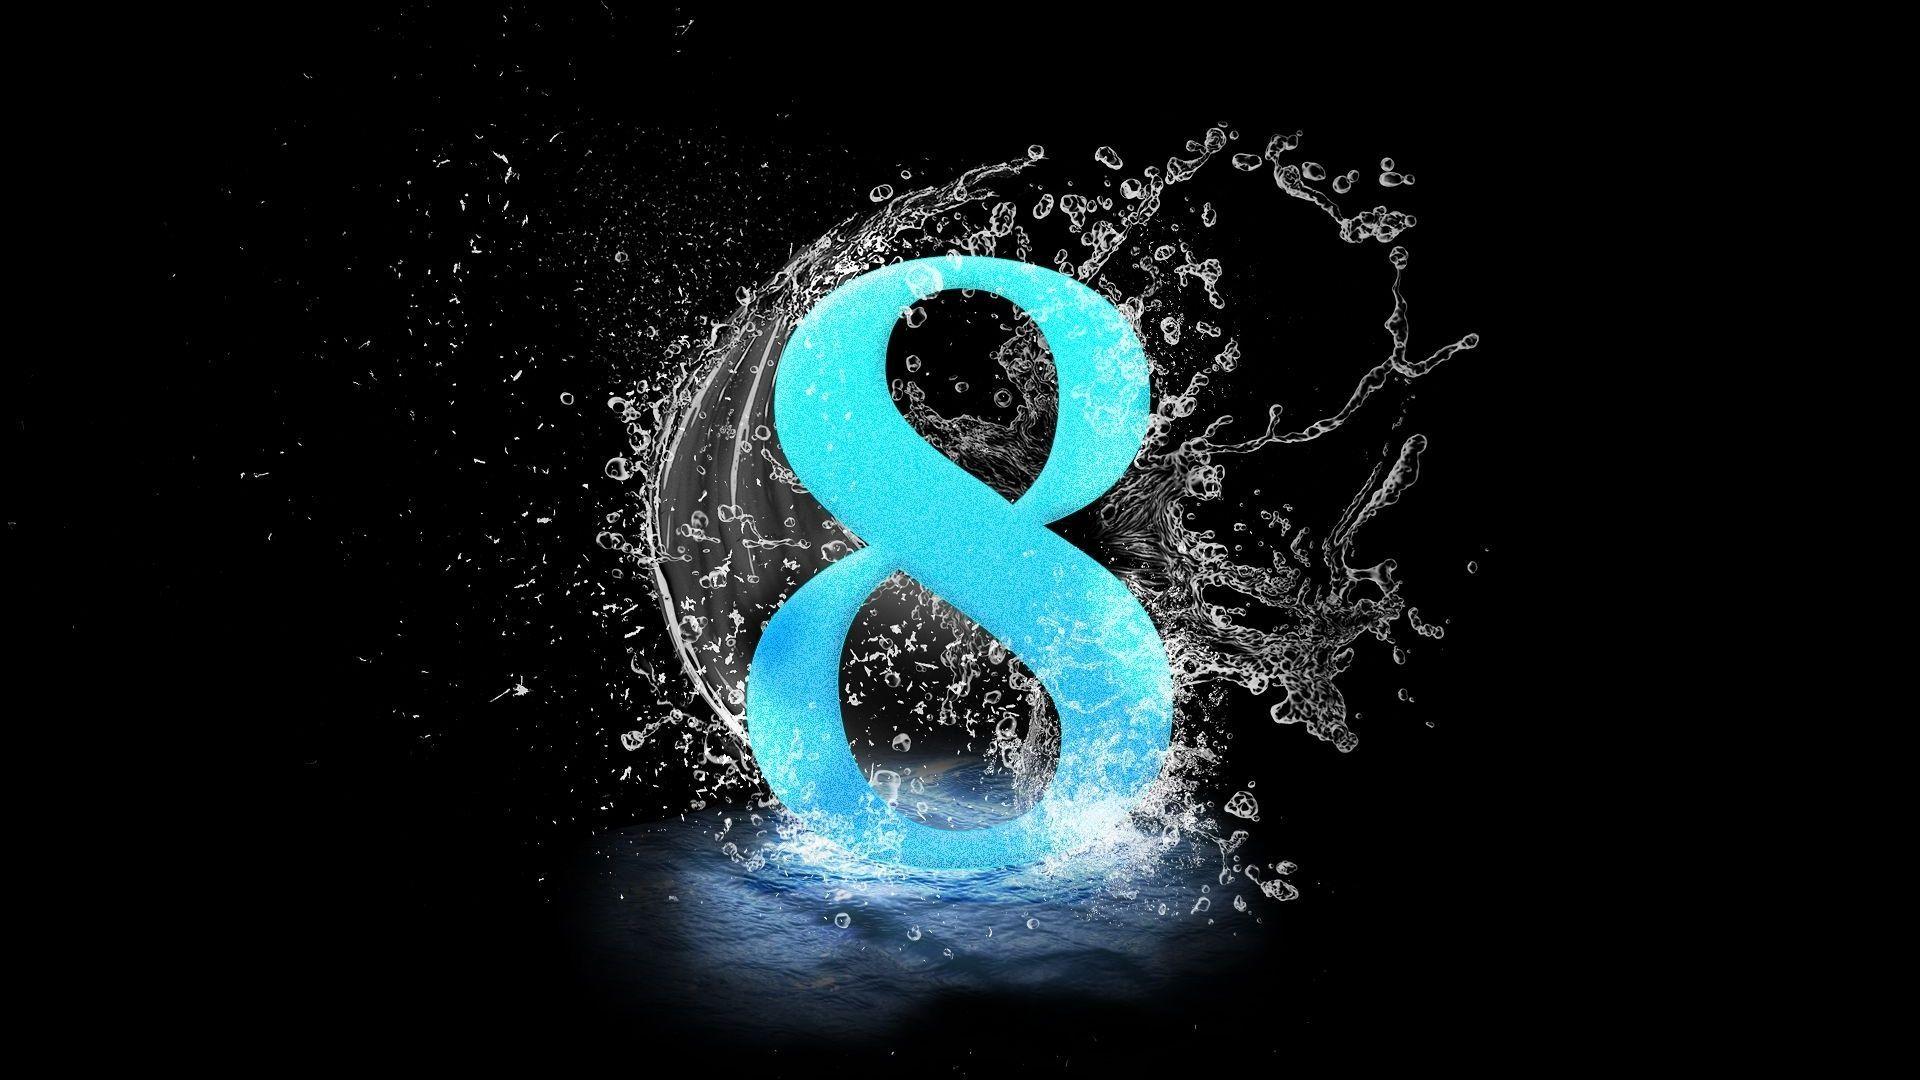 Number 8 Wallpapers - Top Free Number 8 Backgrounds - WallpaperAccess